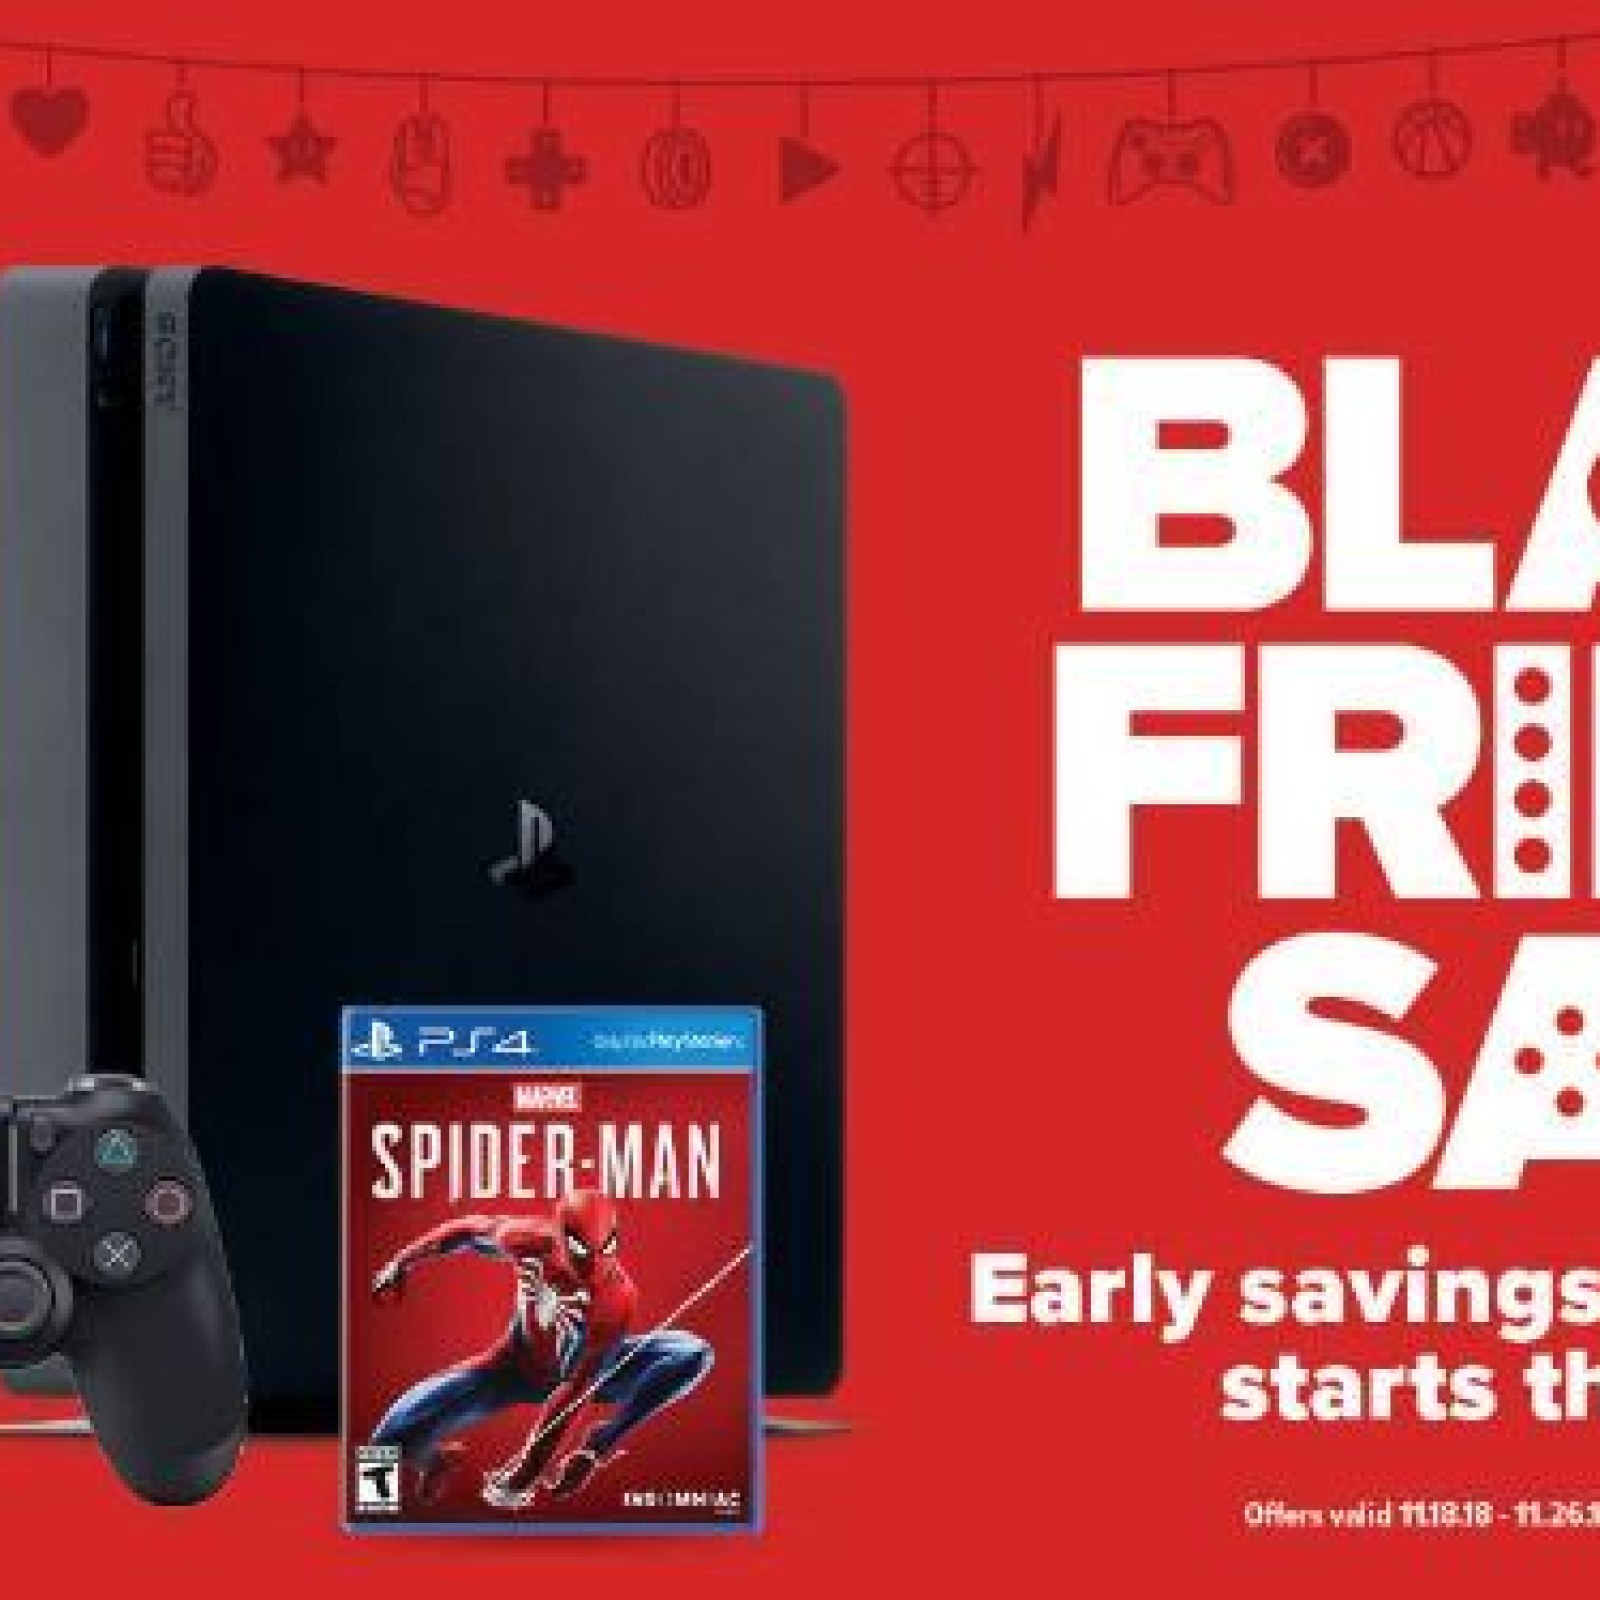 Gamestop Black Friday 2018 Deals Start Saving Early On Xbox One